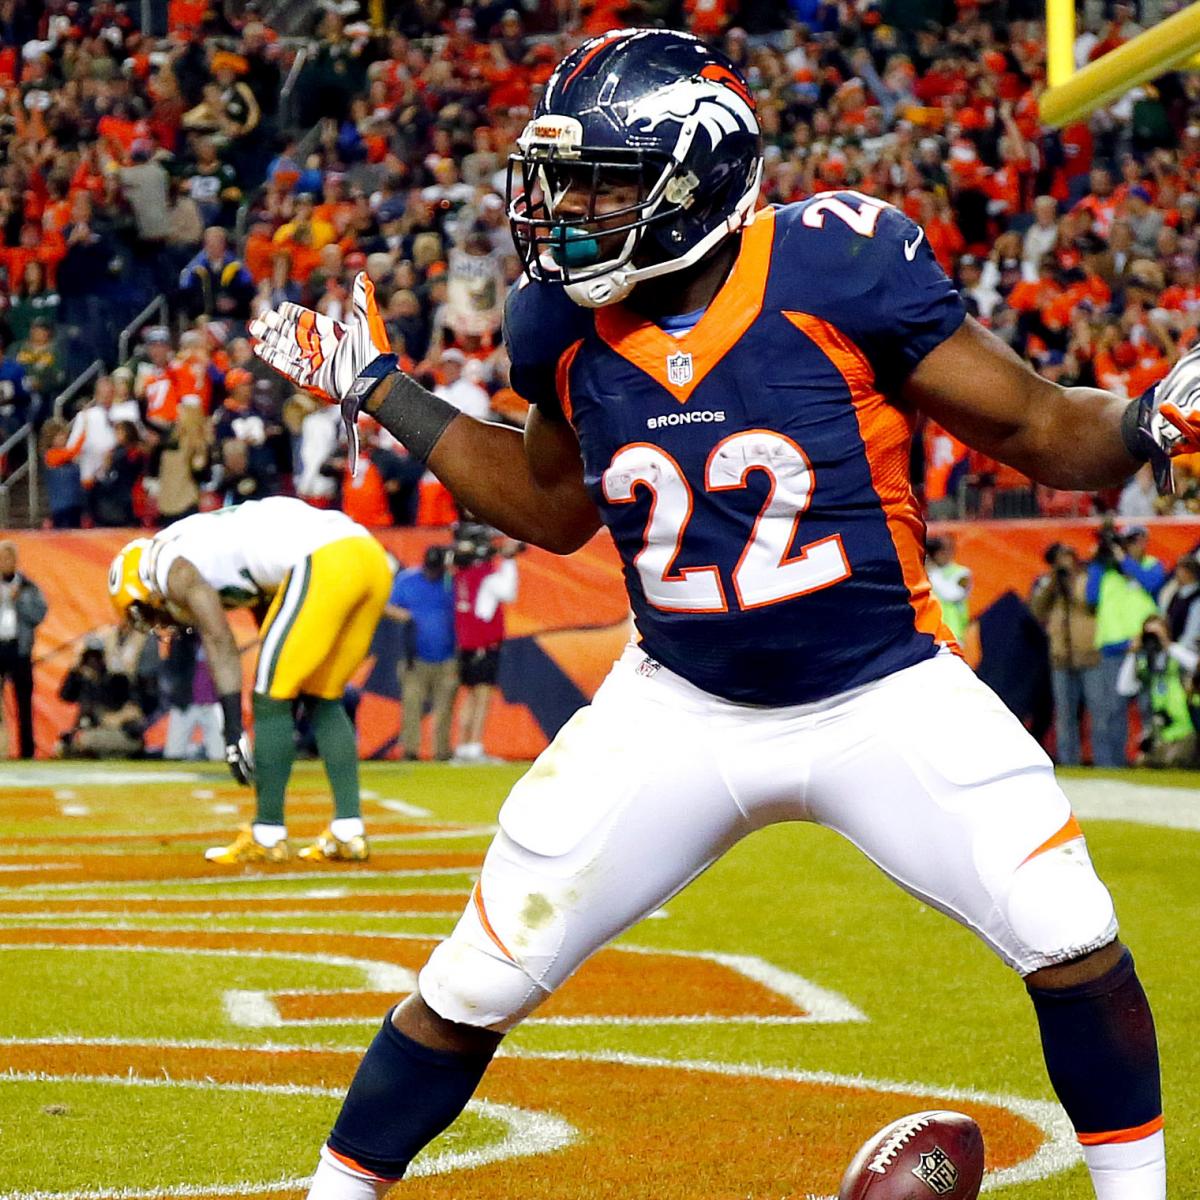 Green Bay Packers vs. Denver Broncos Video Highlights and Recap from